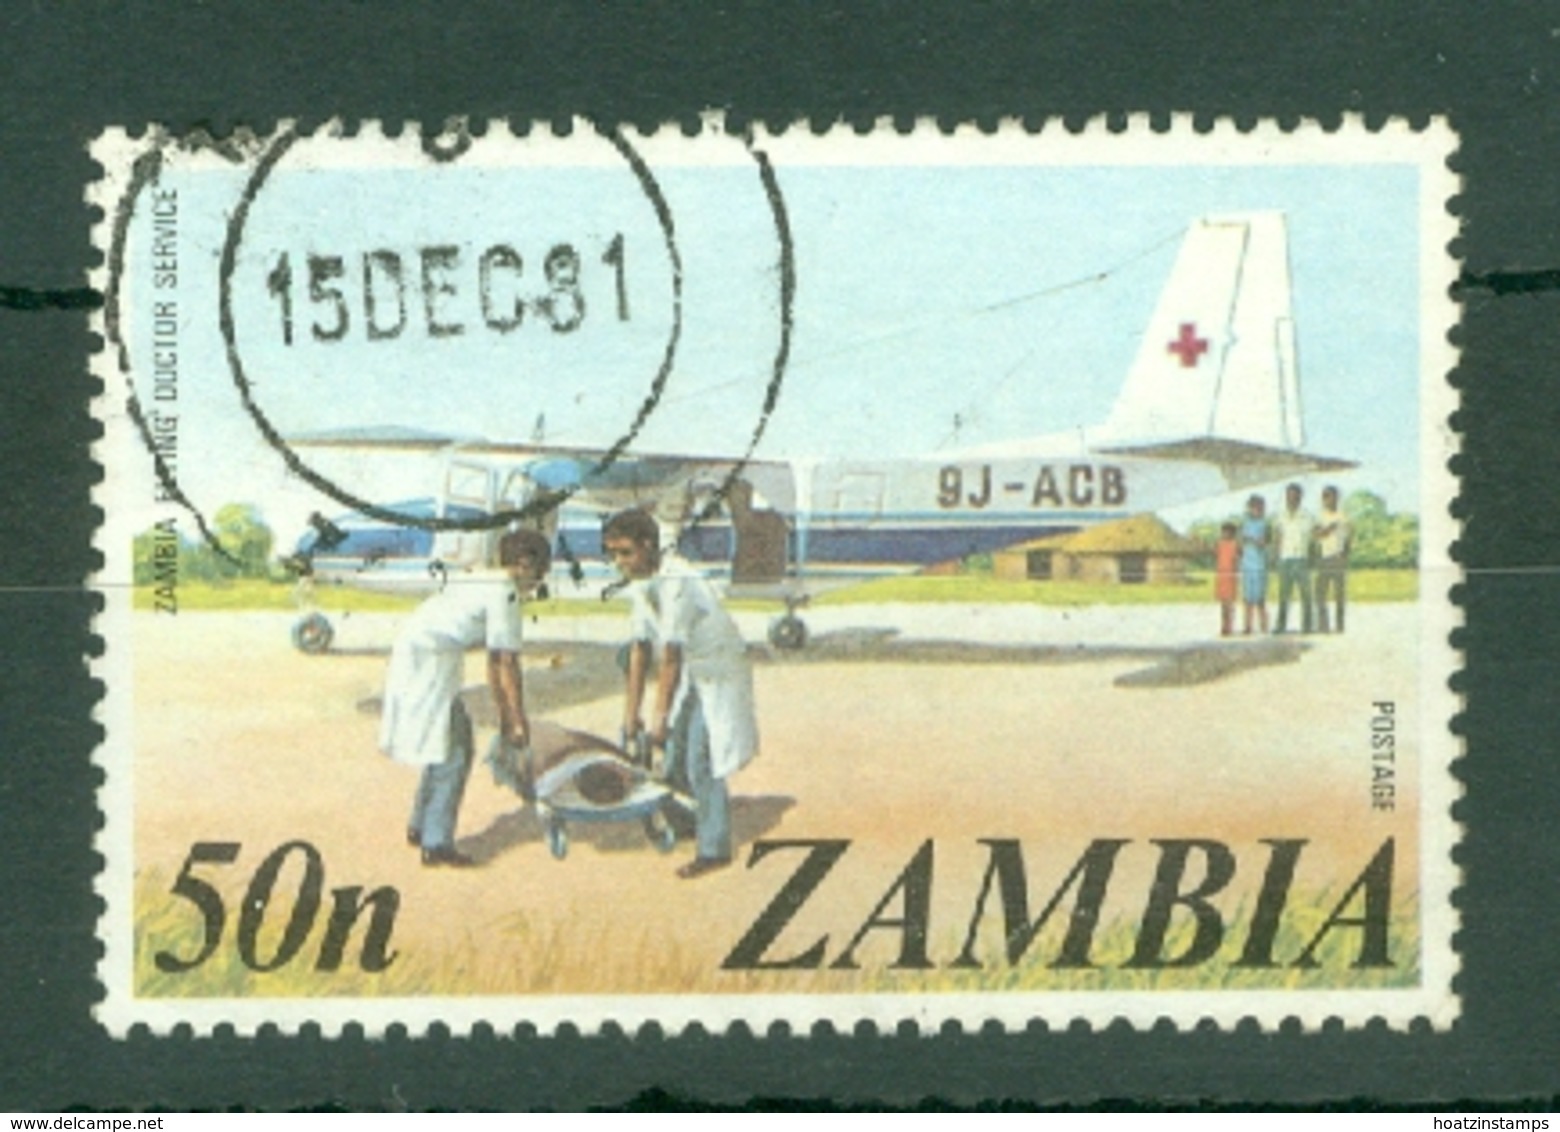 Zambia: 1975   Pictorial    SG237   50n     Used - Zambia (1965-...)